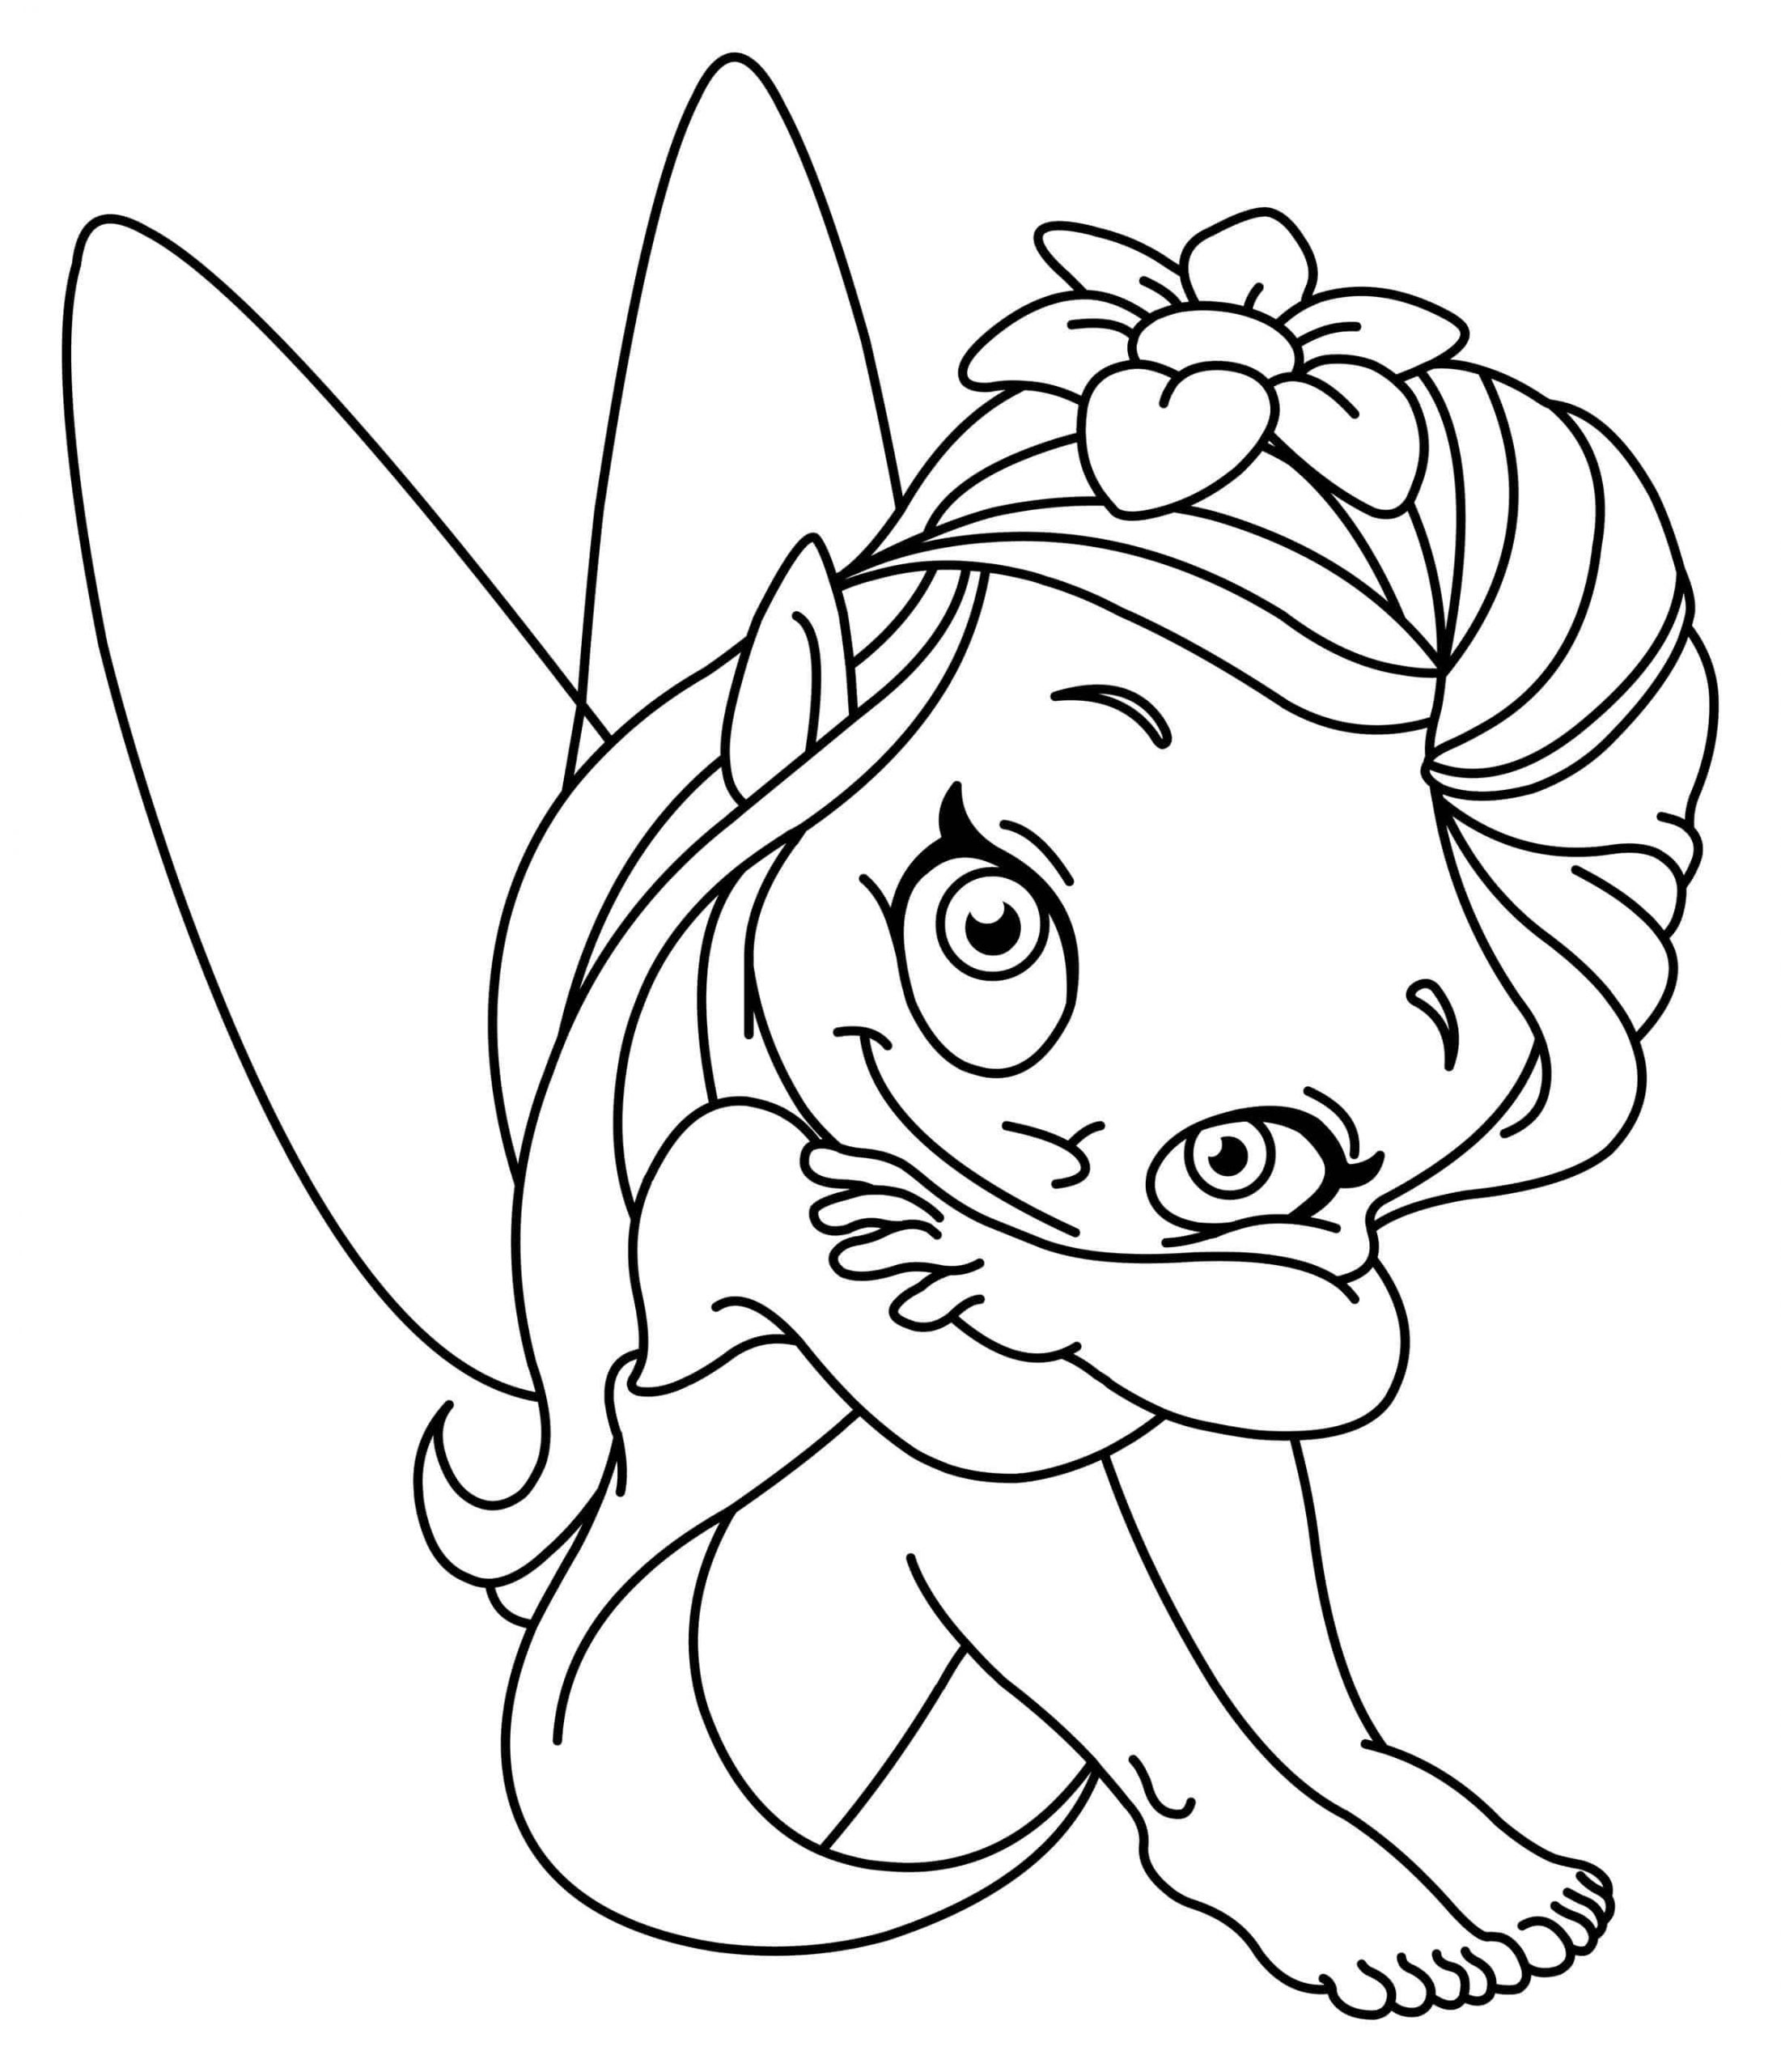 Coloring Pages For Girls Online
 The Best Free Coloring Pages For Girls